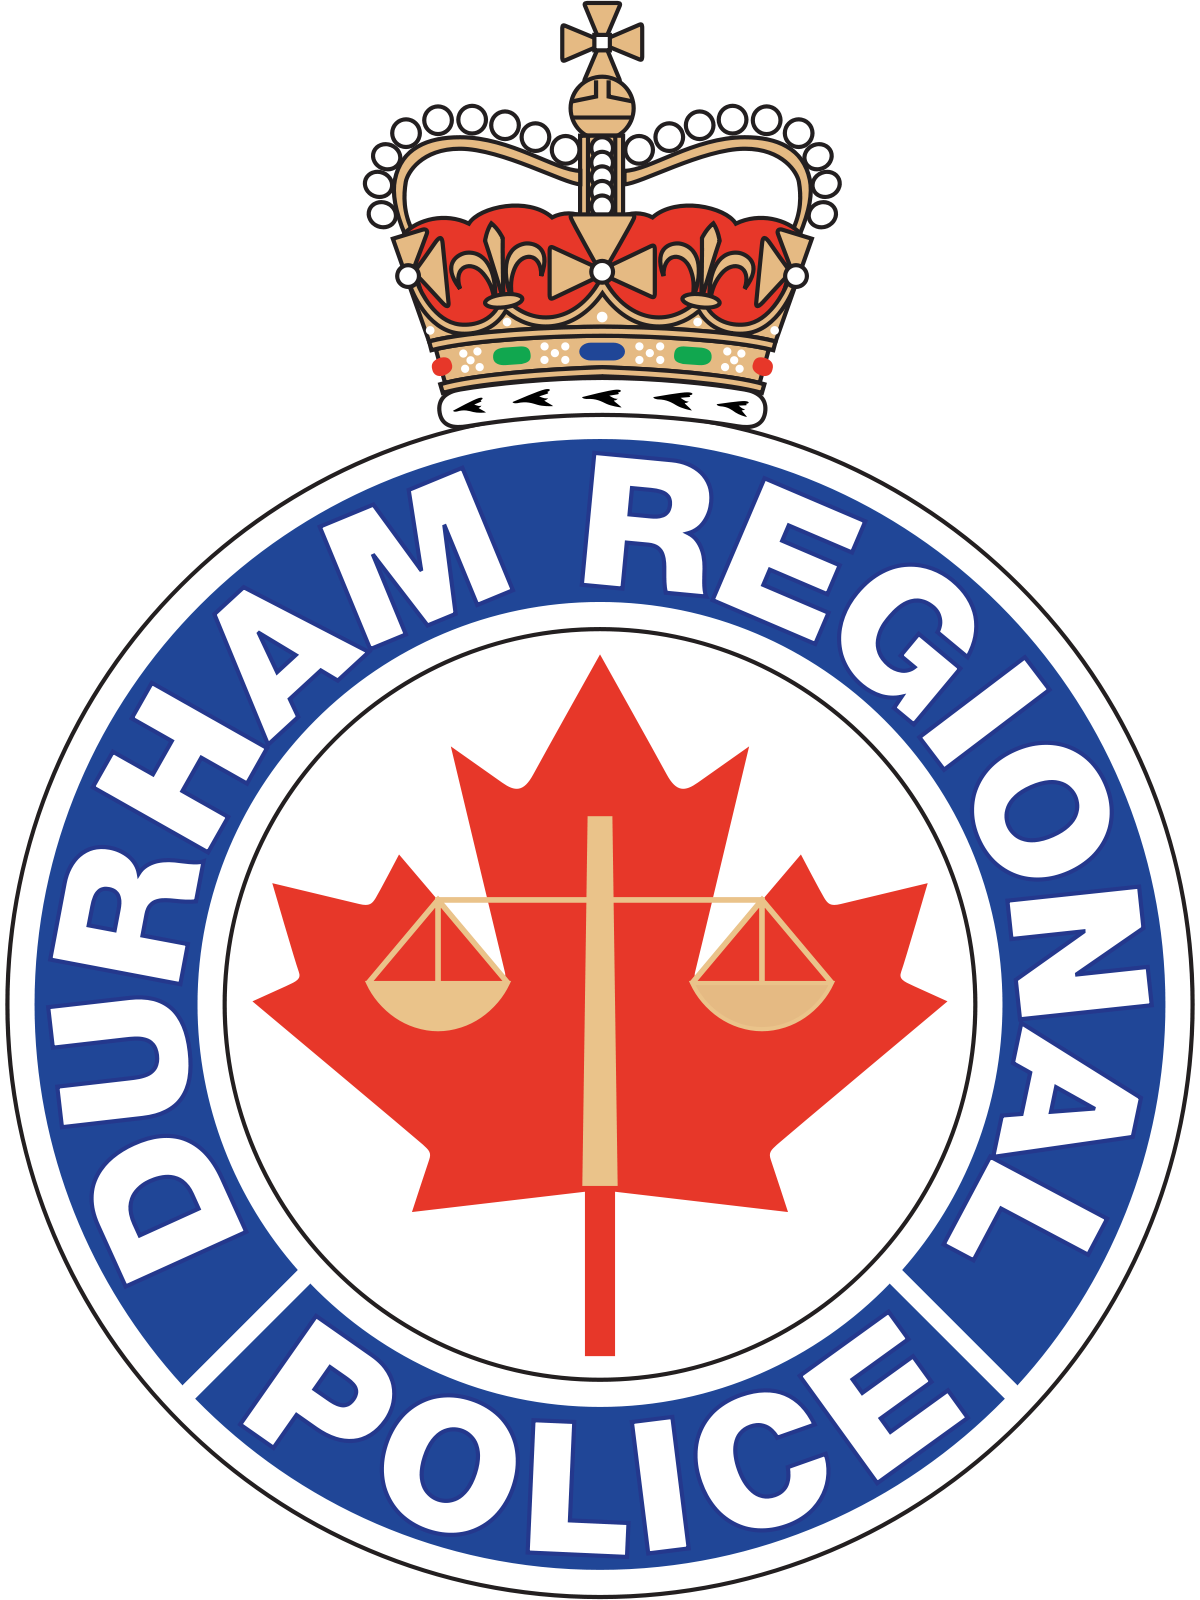 An image of the Durham Region Police Service logo